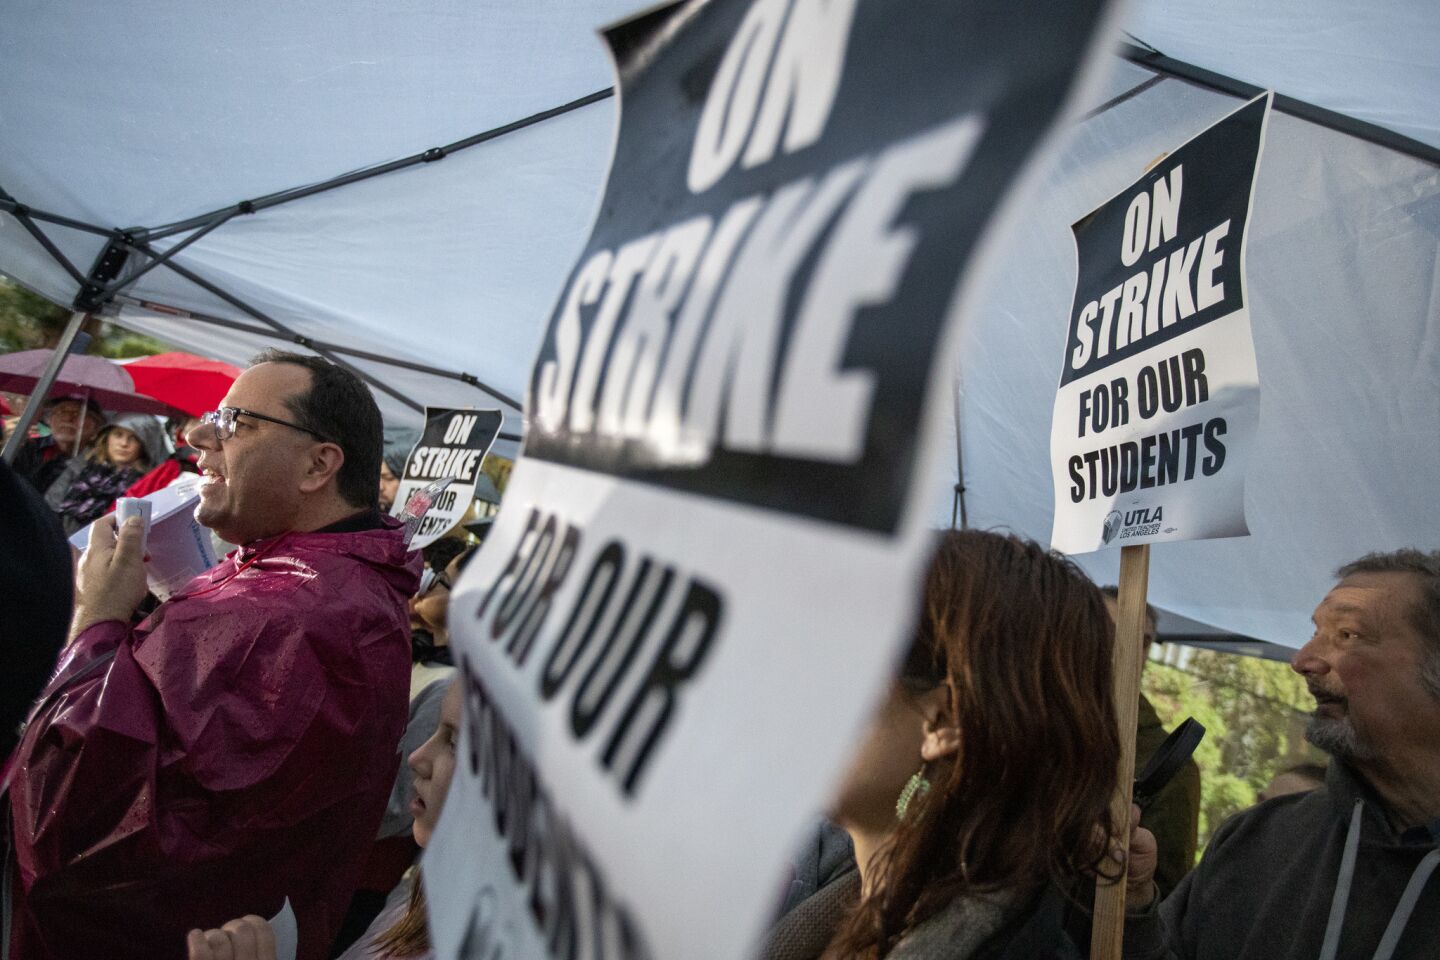 UTLA President Alex Caputo-Pearl, left, kicks off the LAUSD teachers' strike at John Marshall High School in Los Angeles. <strong>More: <a href="https://www.latimes.com/local/education/la-me-edu-los-angeles-teachers-strike-utla-president-20190114-story.html">UTLA president calls for more money for teachers 'in a city rife with millionaires.'</a></strong>